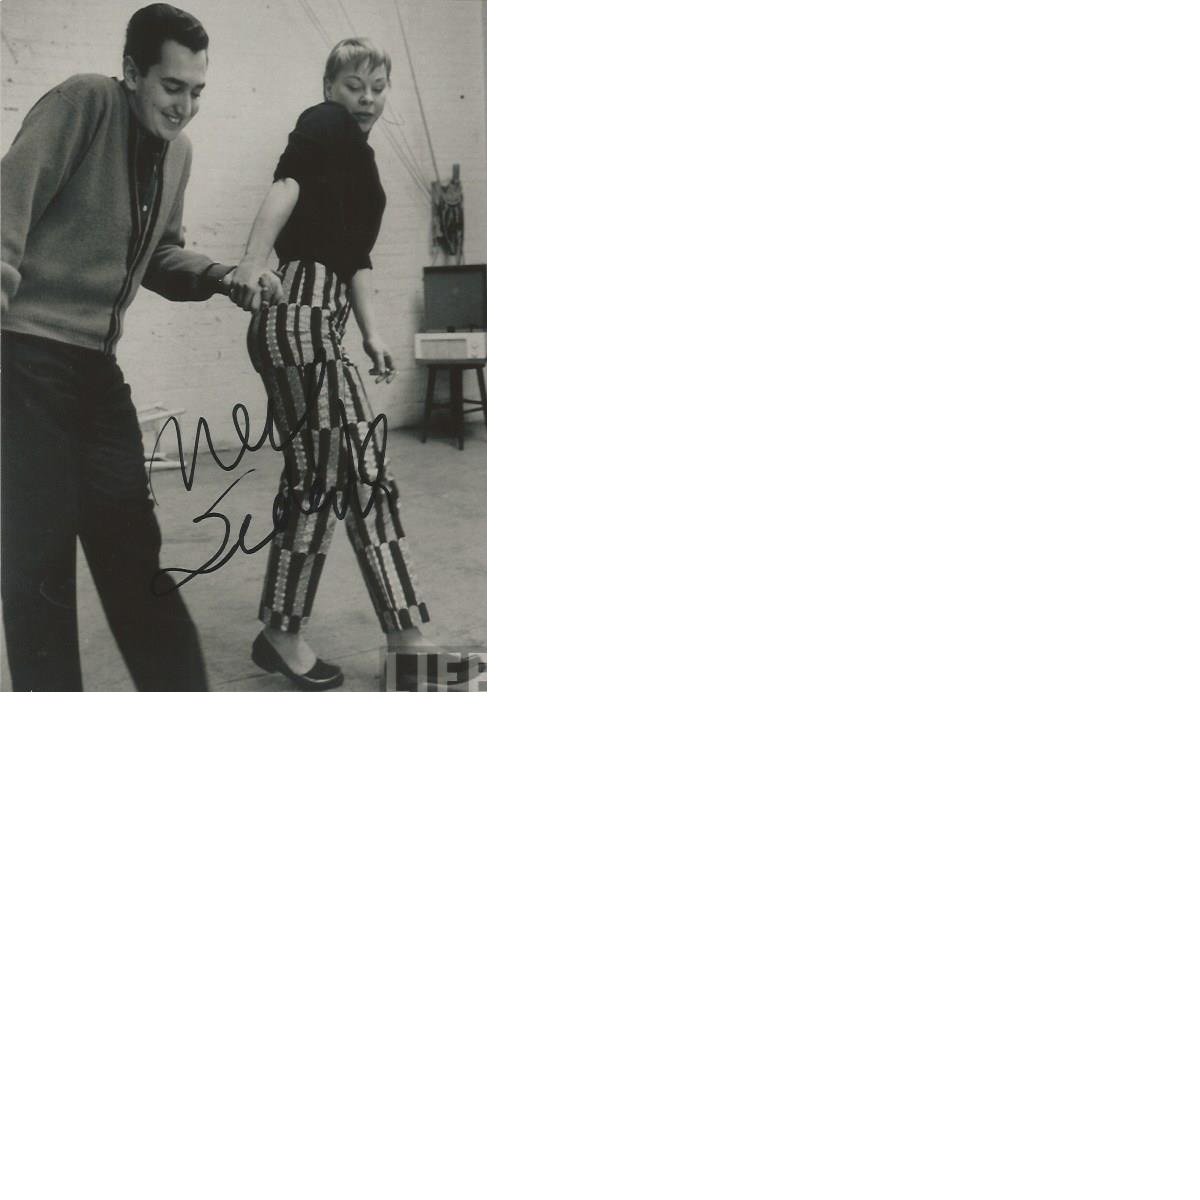 Neil Sedaka signed 7x5 b/w photo. Good Condition. All signed pieces come with a Certificate of